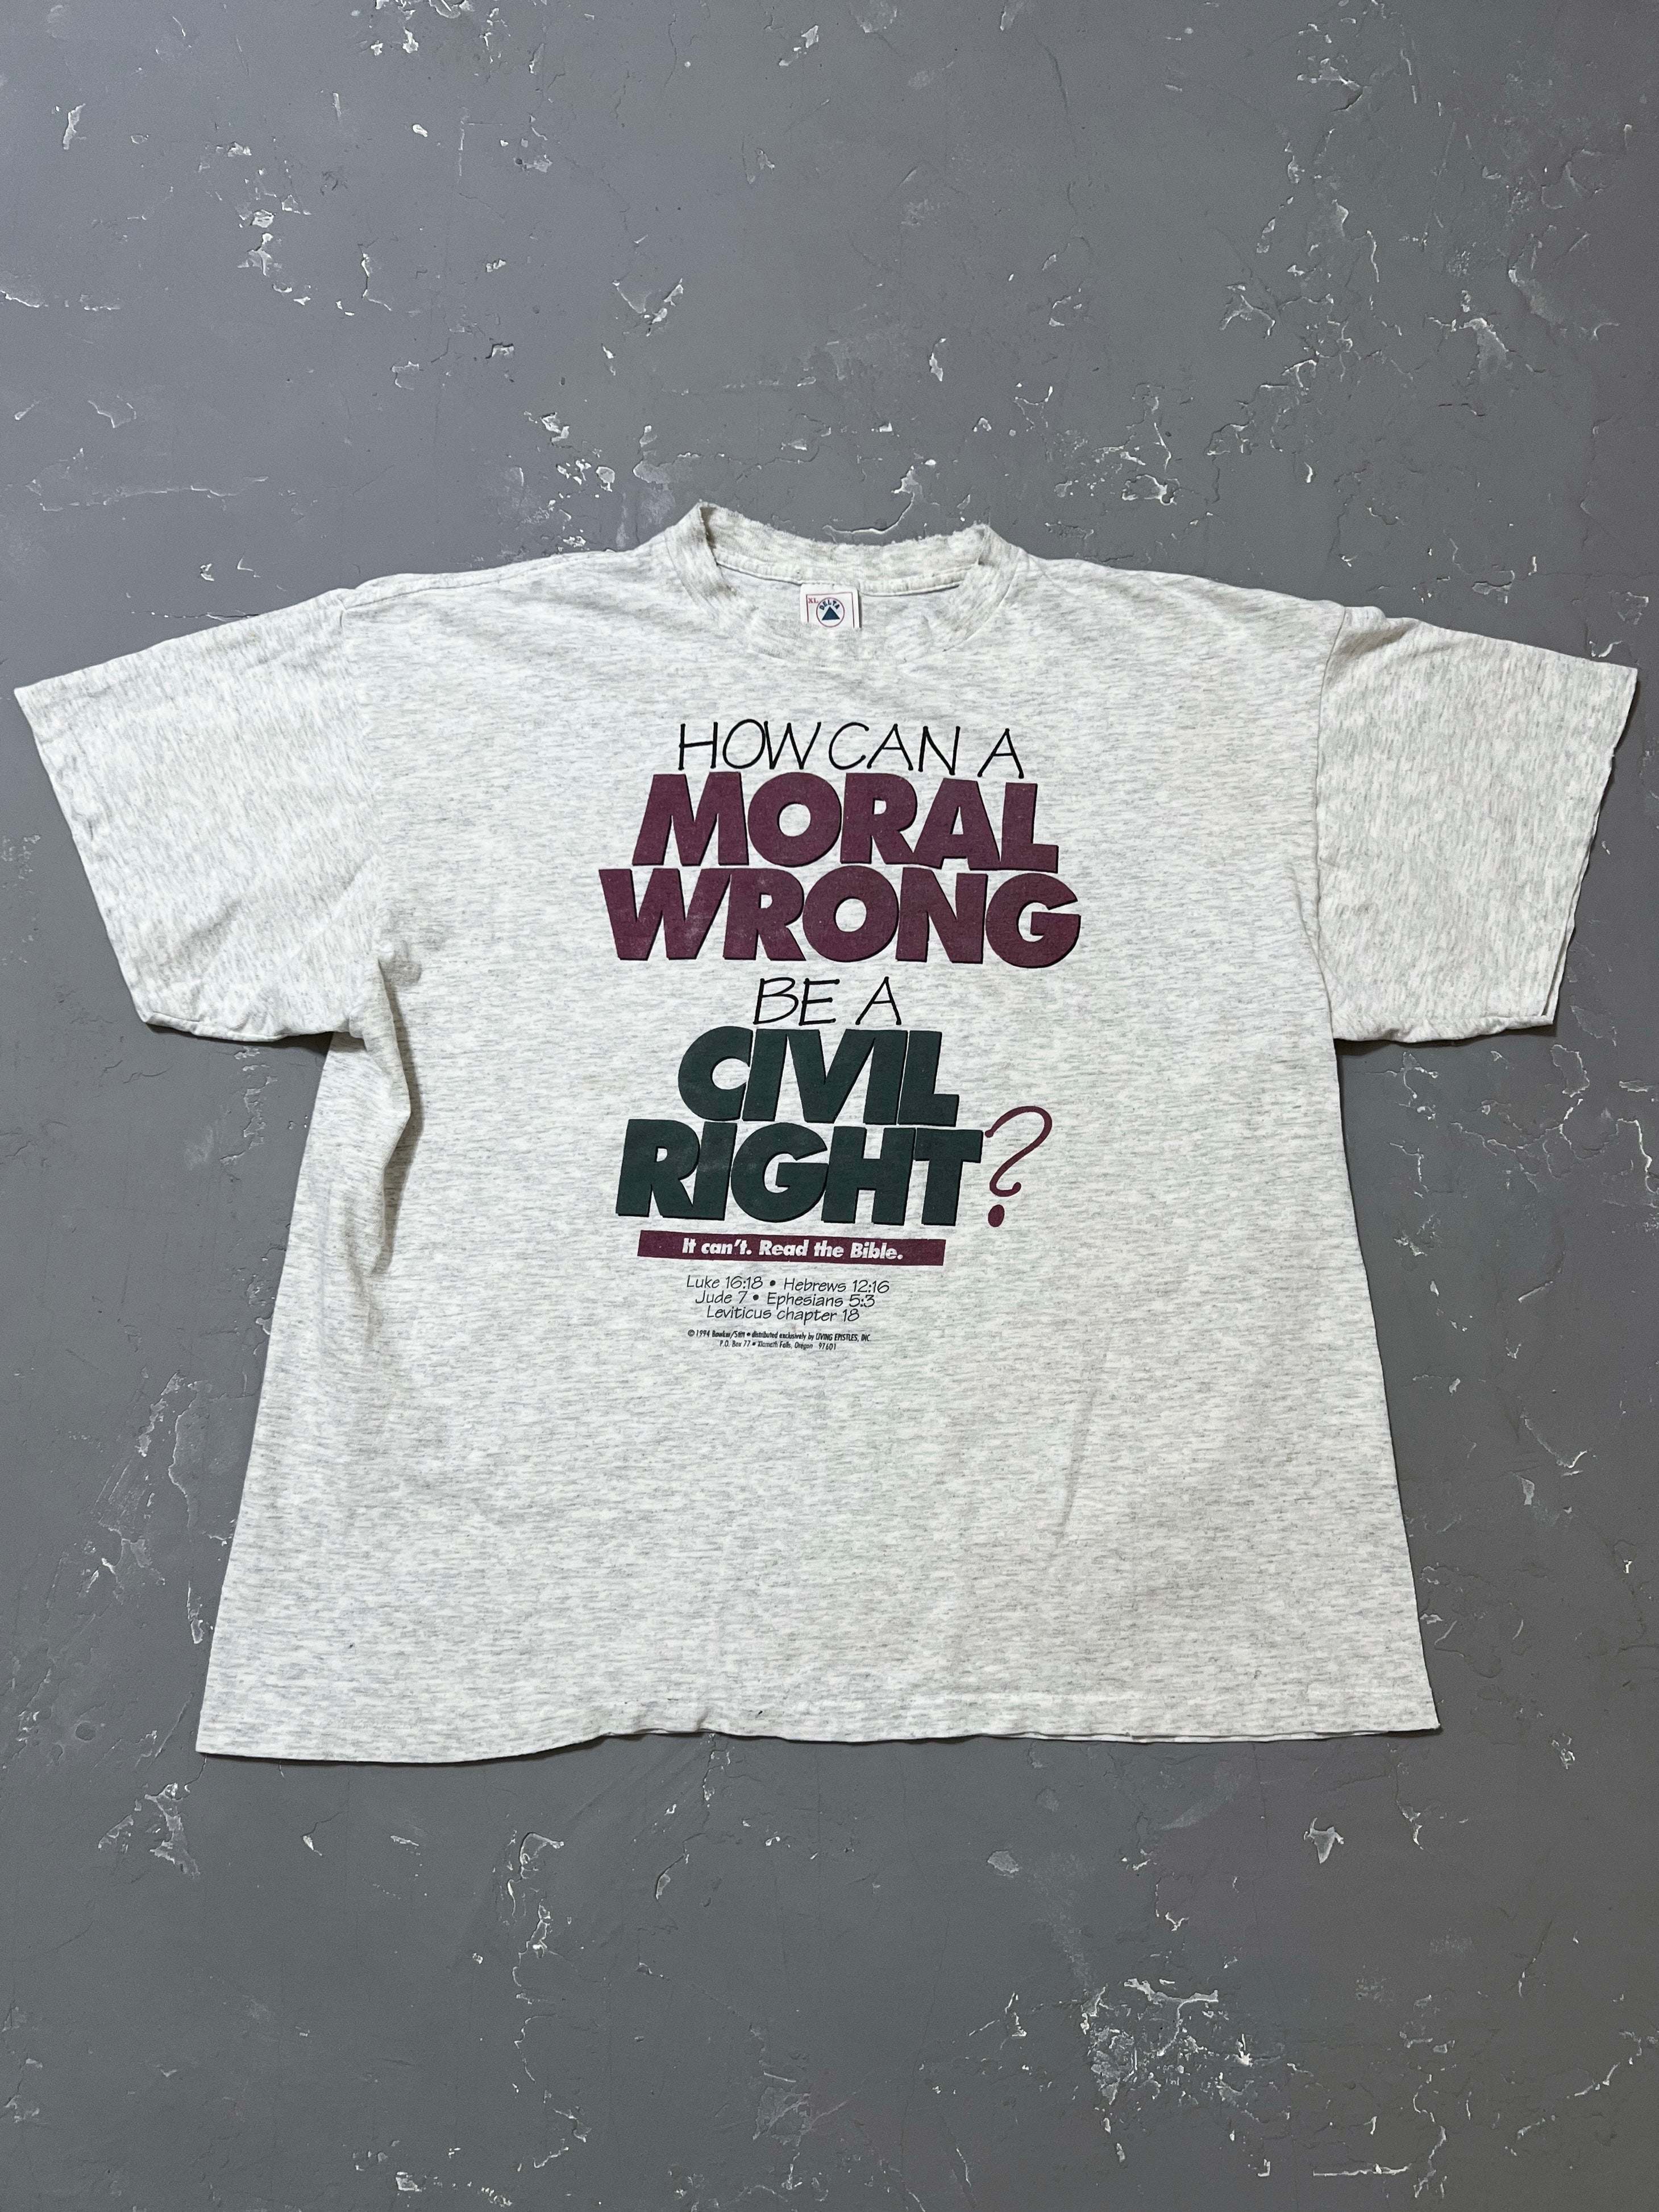 1990s “How Can A Moral Wrong Be A Civil Right?” Jesus Tee [XL]